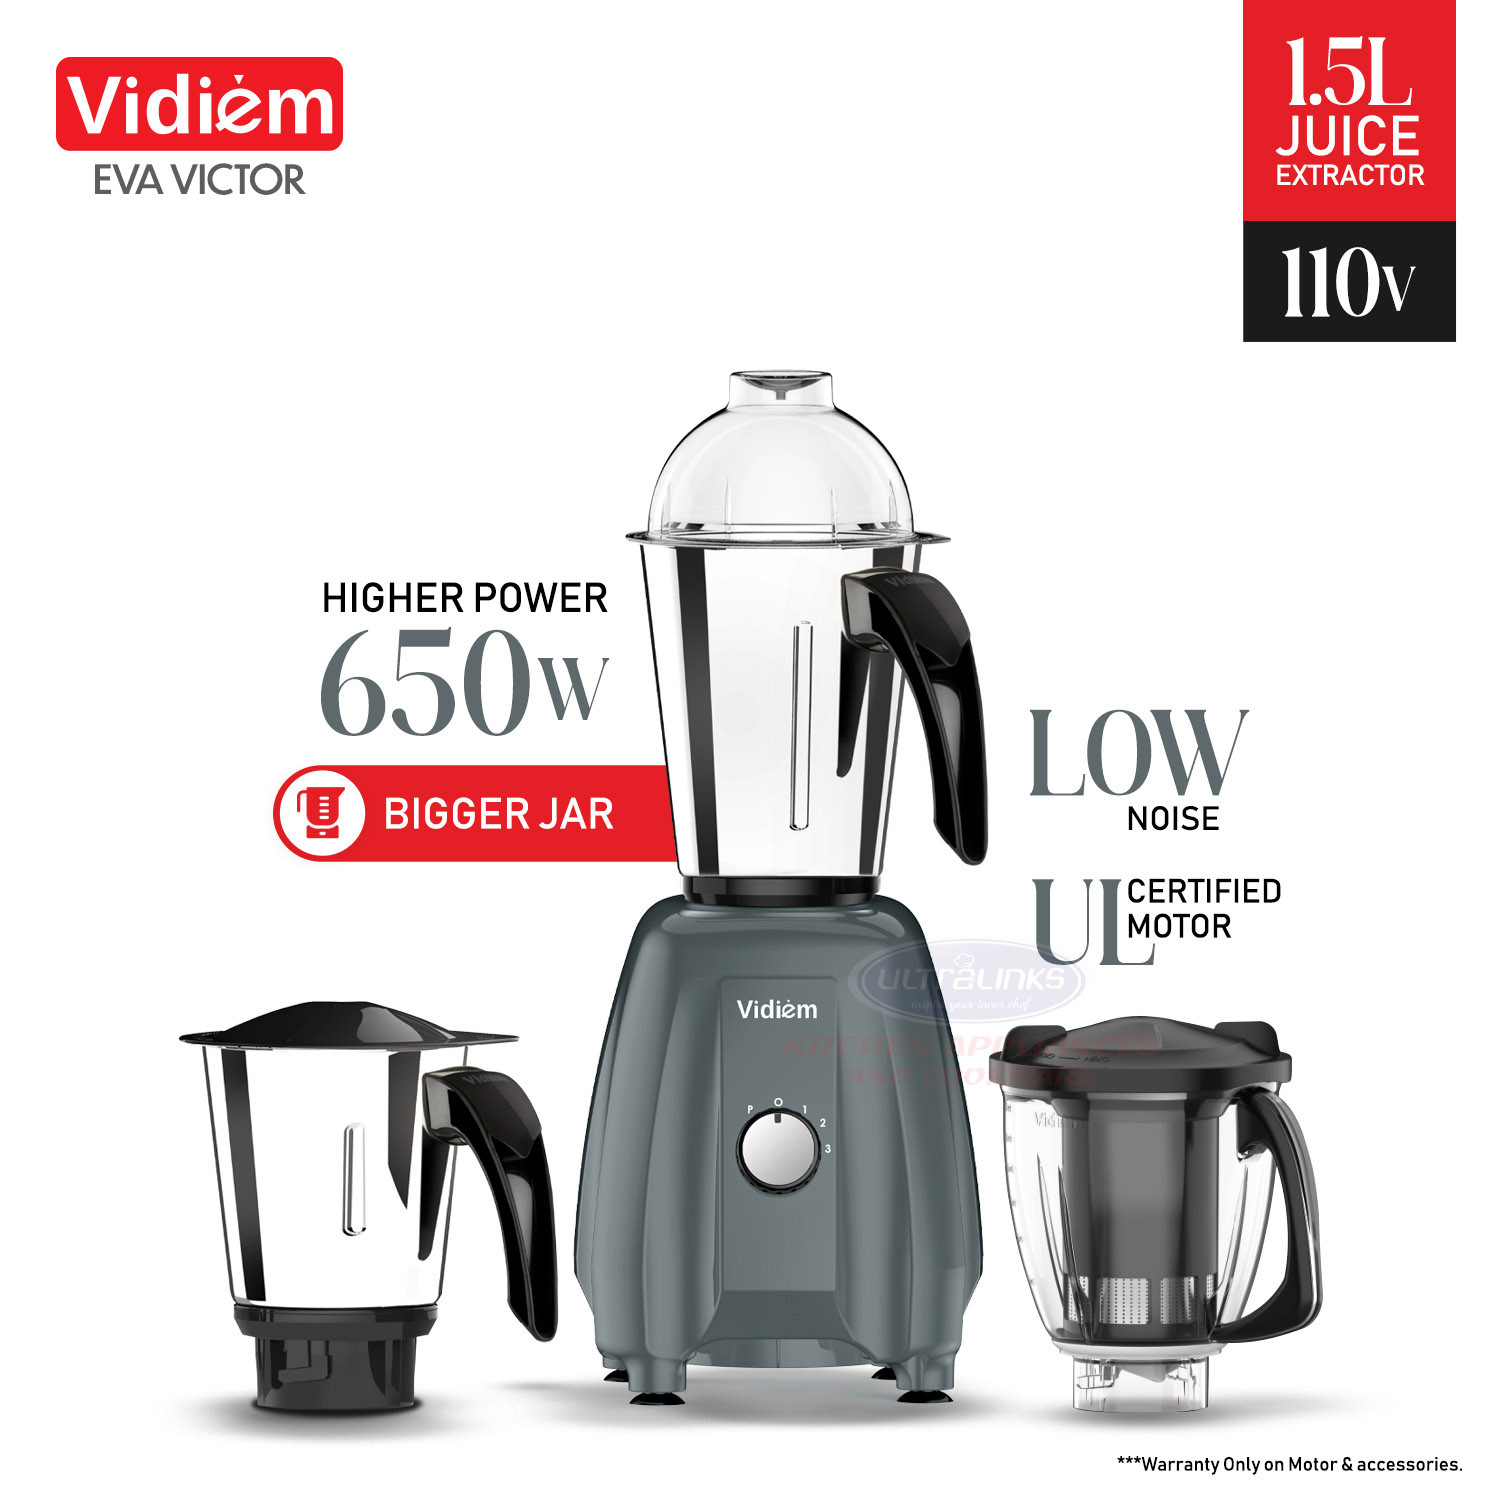 vidiem-eva-victor-650w-110v-stainless-steel-jars-indian-mixer-grinder-spice-coffee-grinder-with-almond-nut-milk-juice-extractor-for-use-in-canada-usa